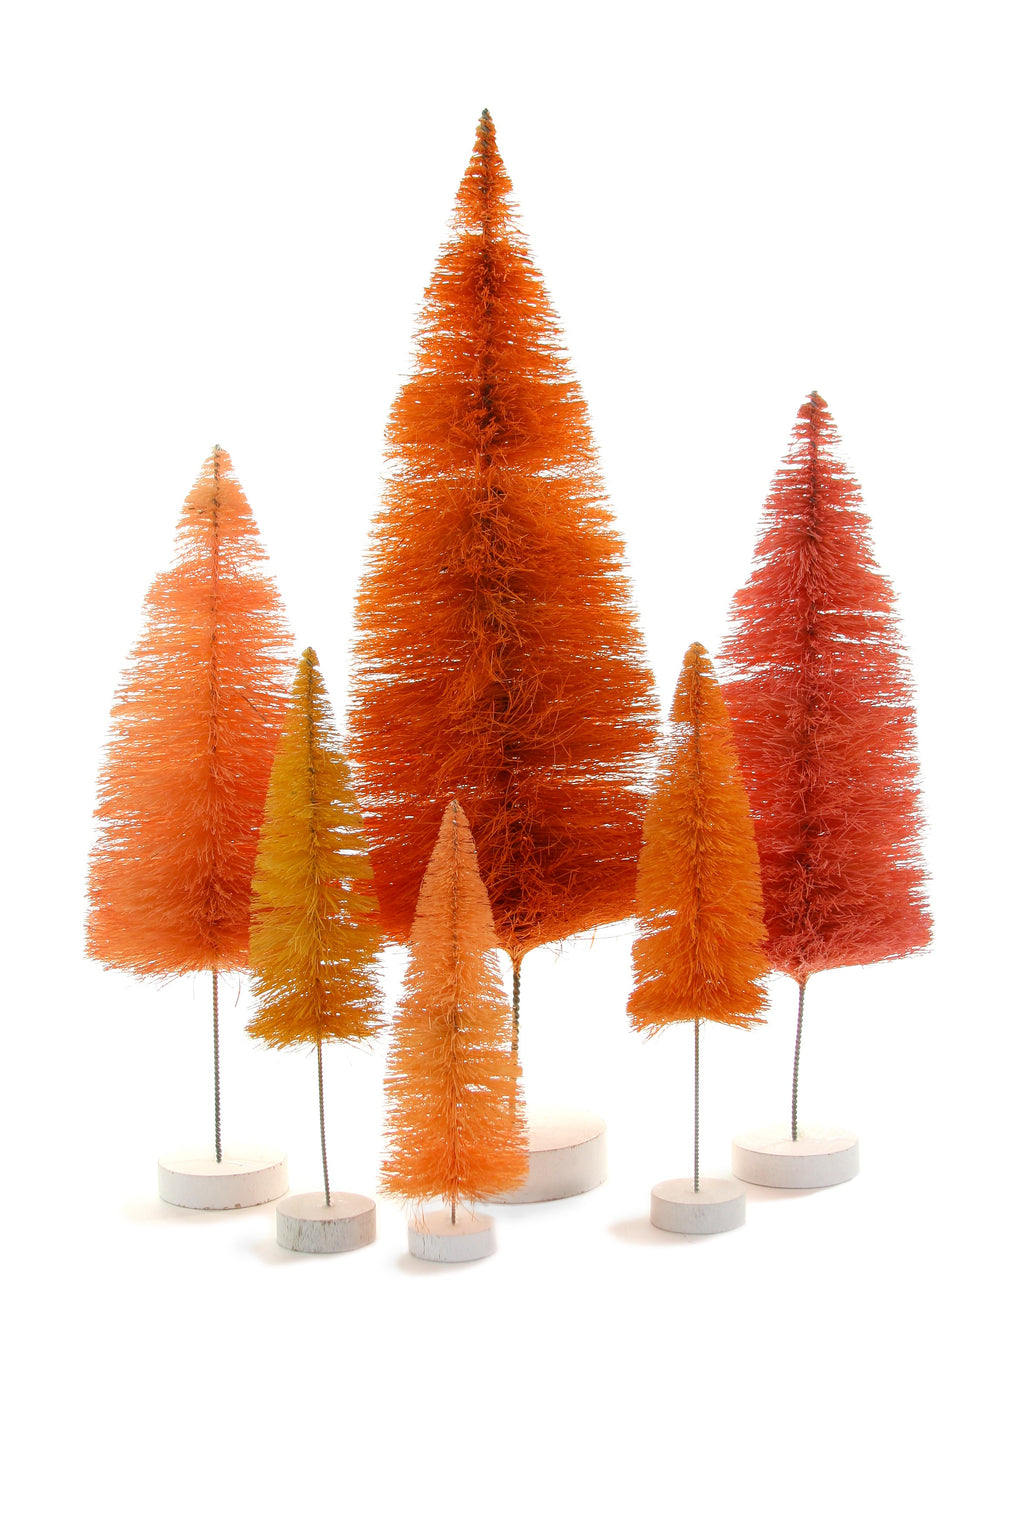 rainbow trees set of 6 in various colors 1